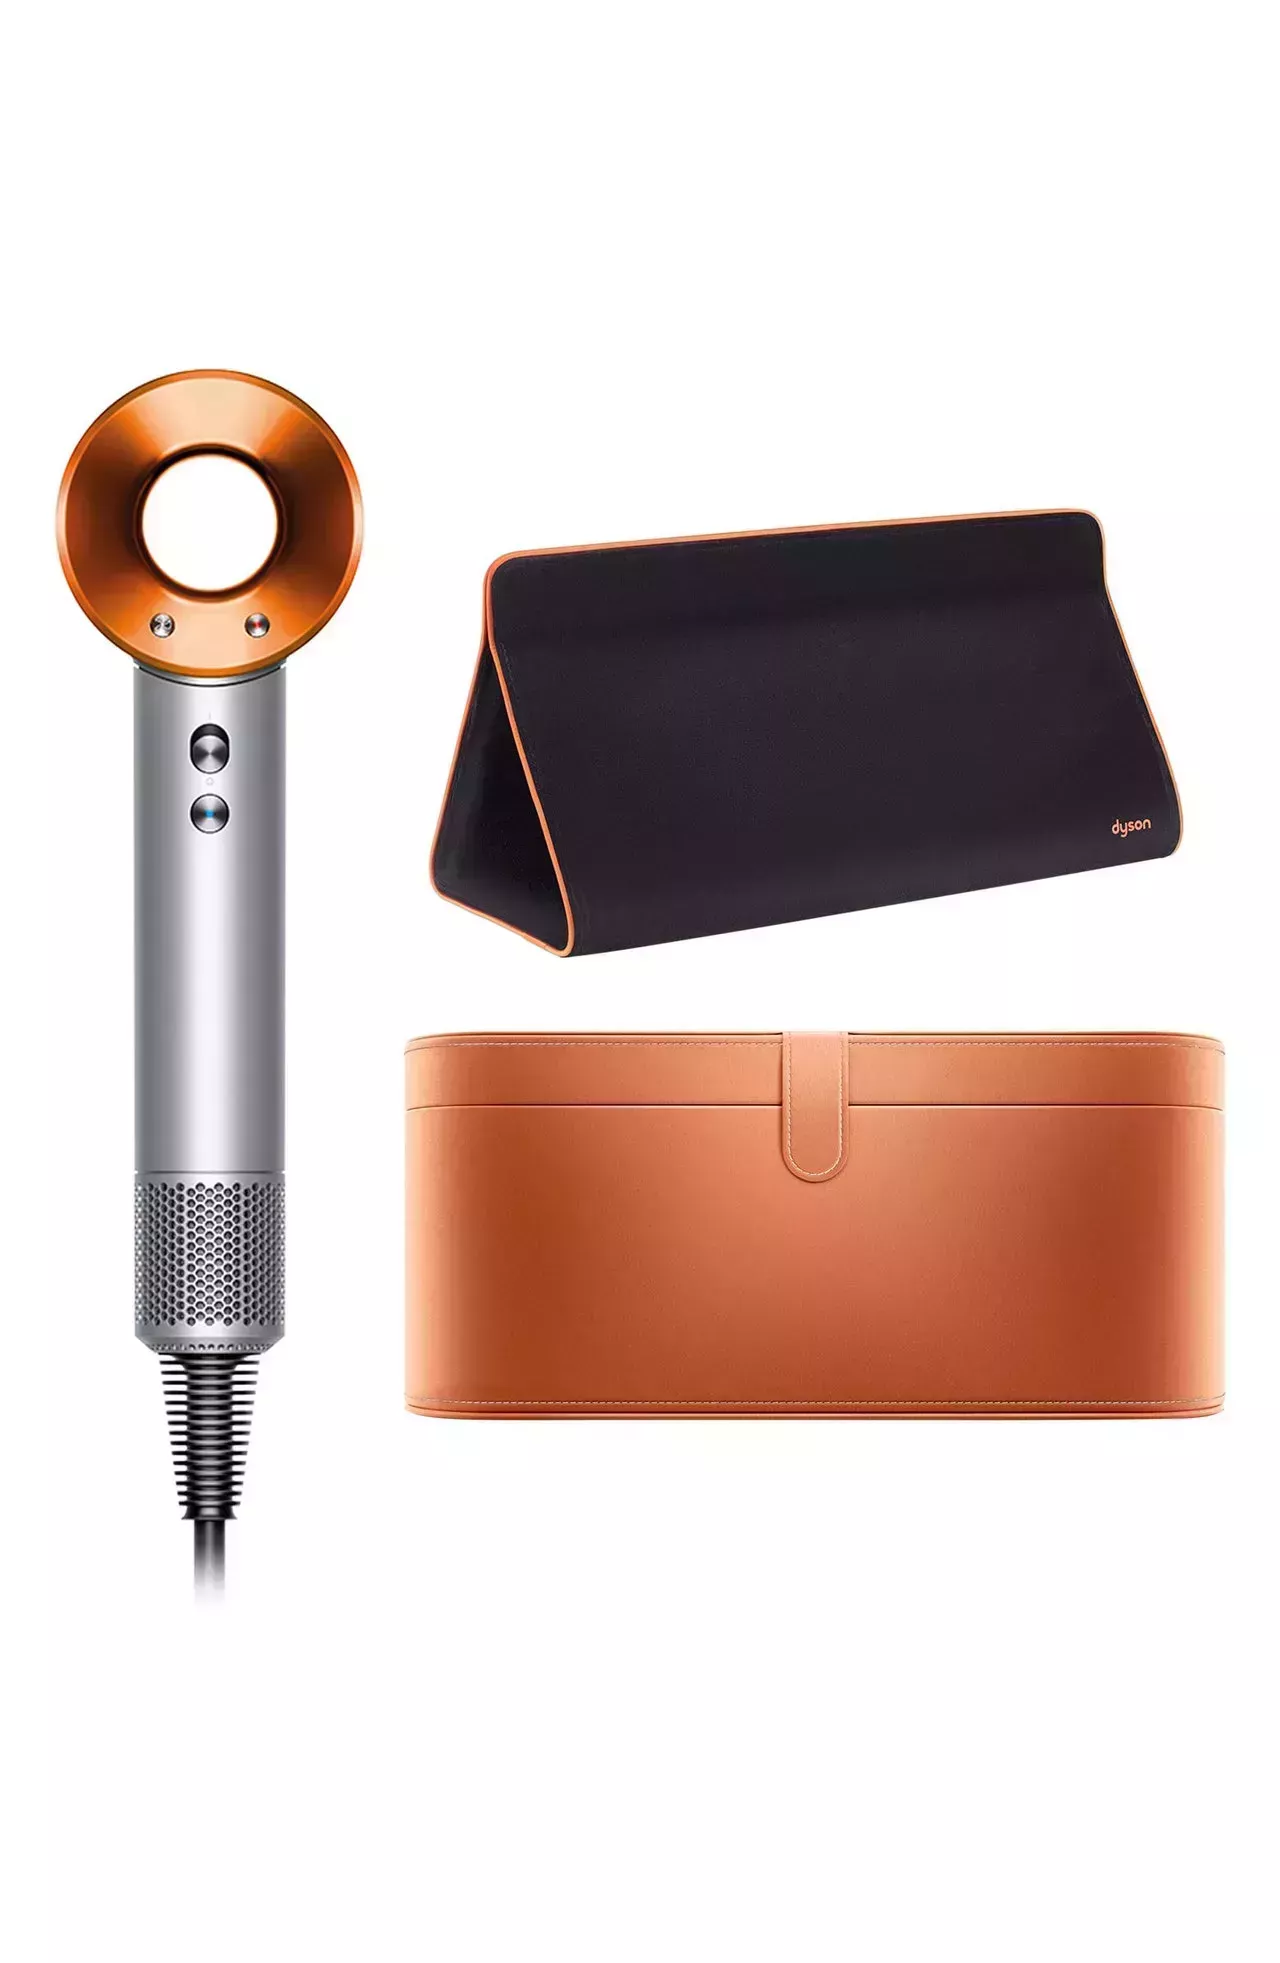 Dyson hair-dryer, black pouch, and copper case on white background